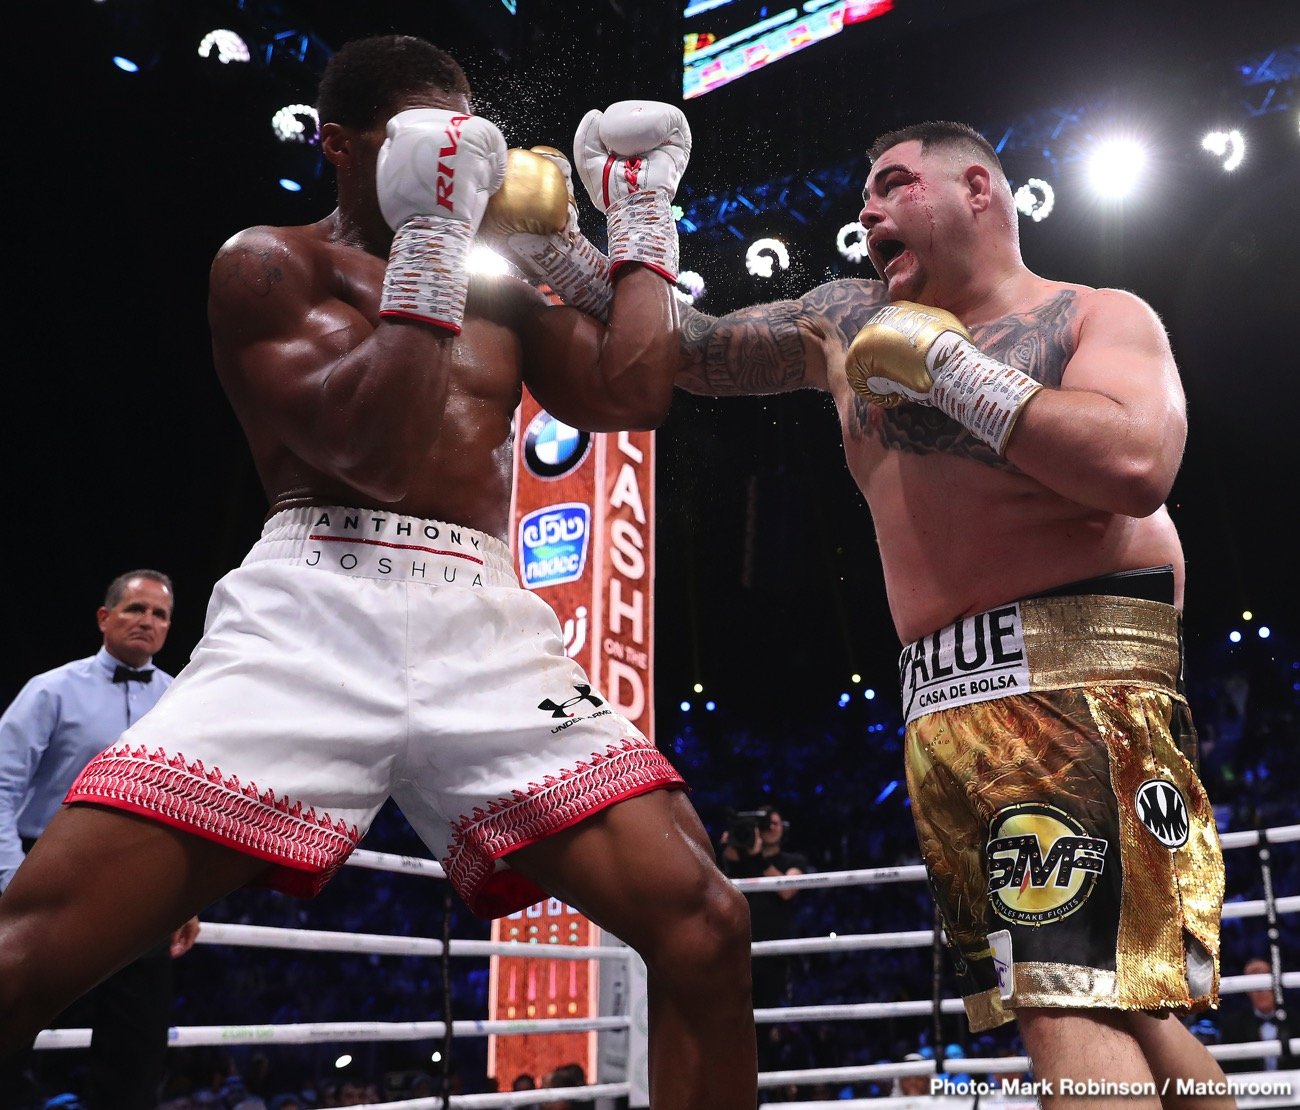 Judging Anthony Joshua: Victory Over Ruiz Included Good, Bad, & Ugly!